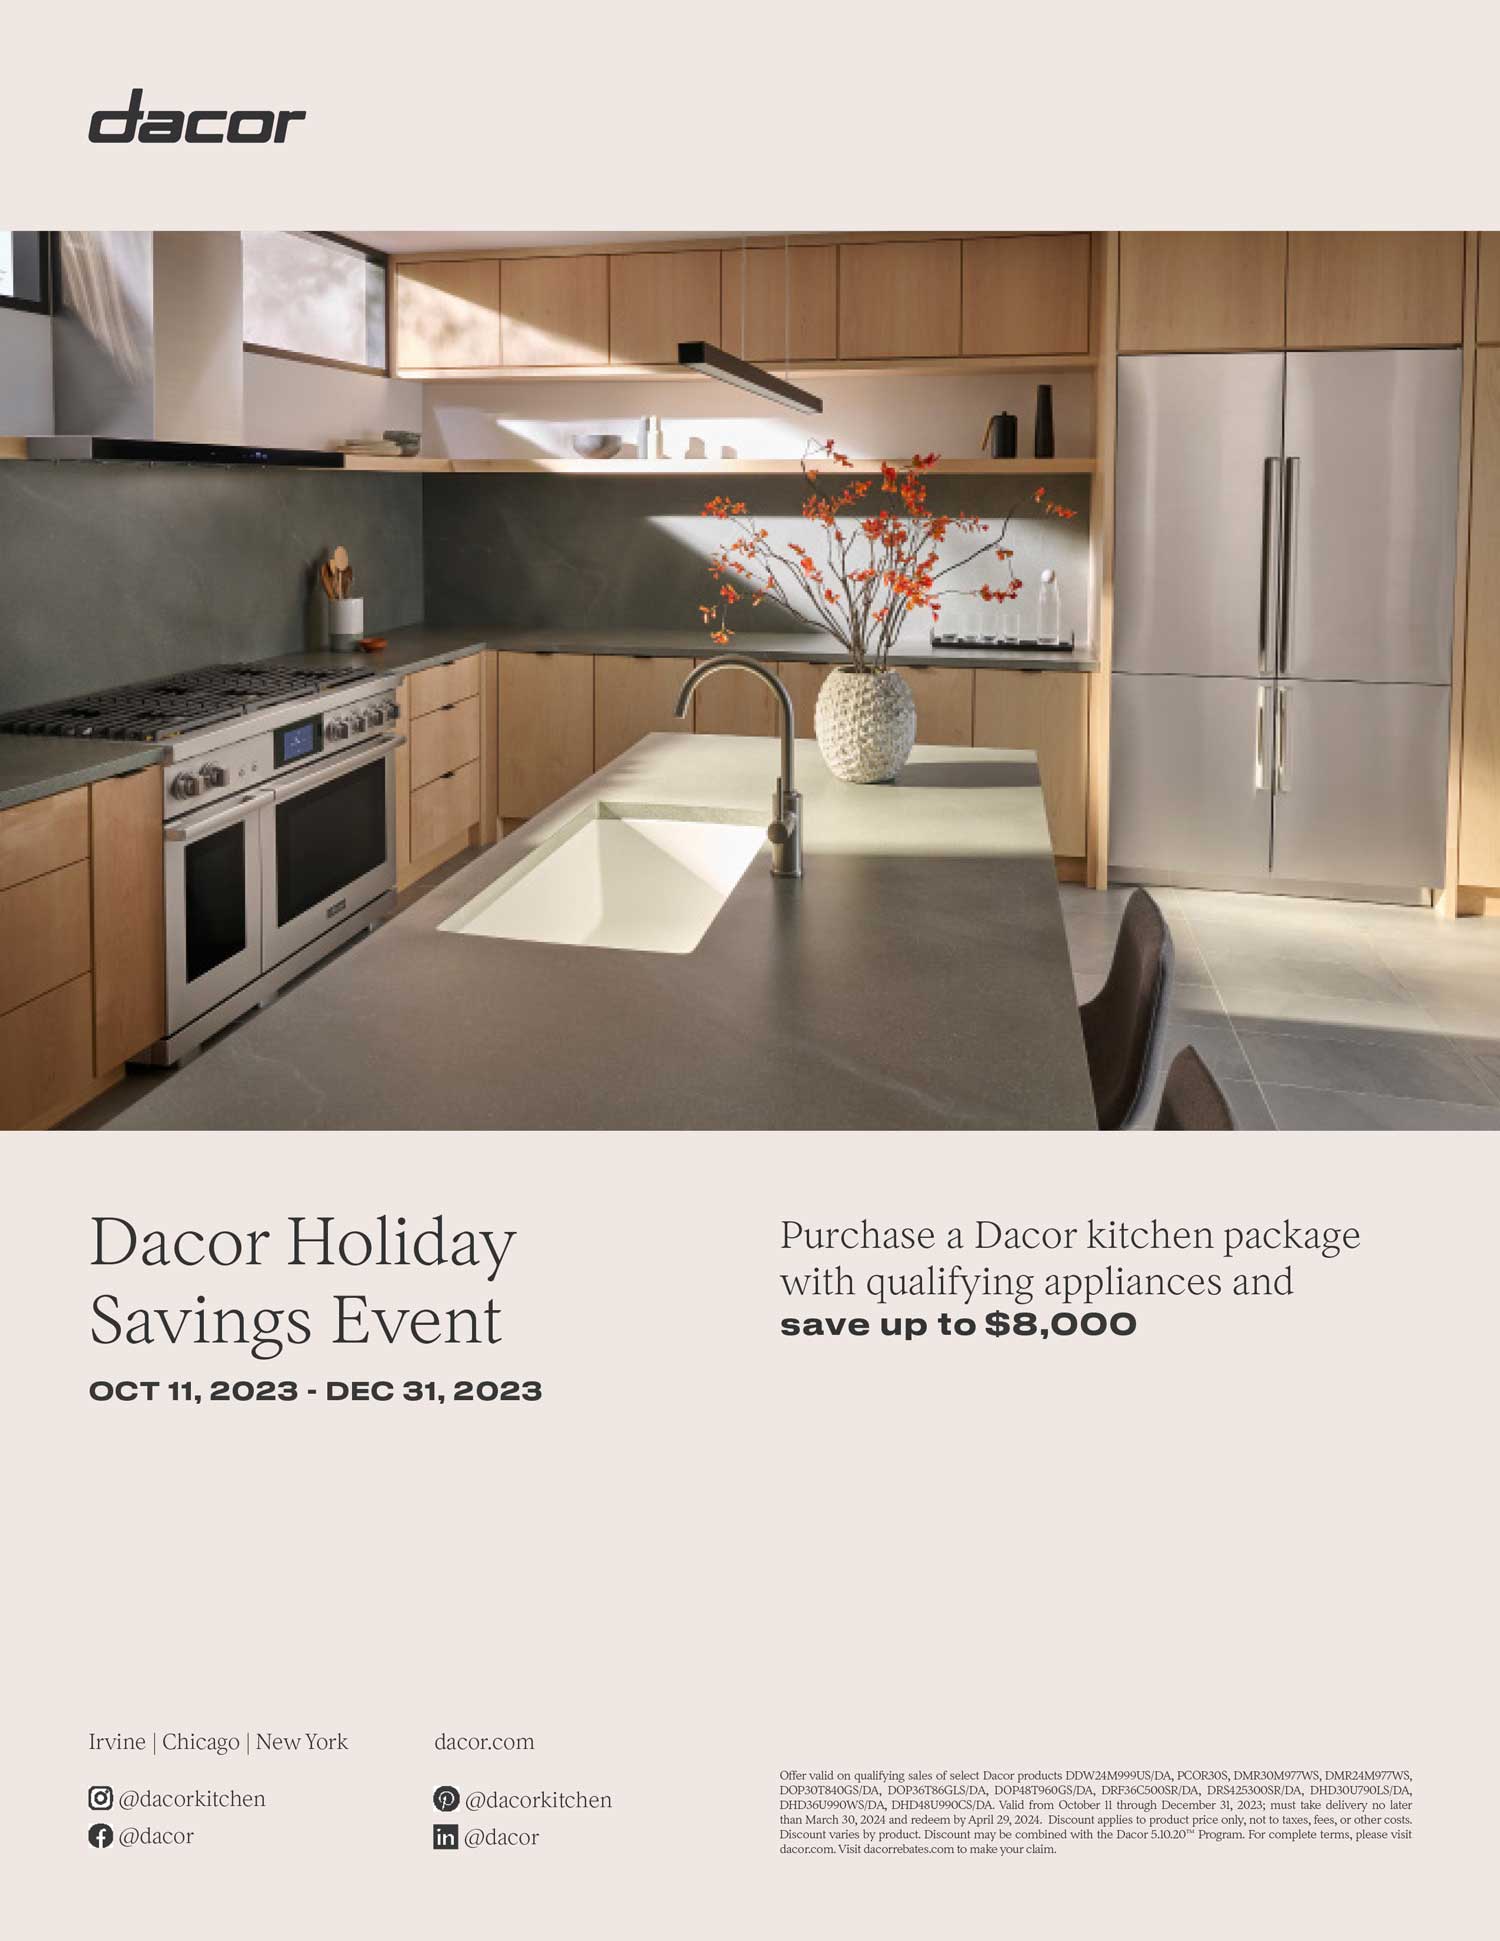 Dacor Holiday Savings event - Save up to $8,000